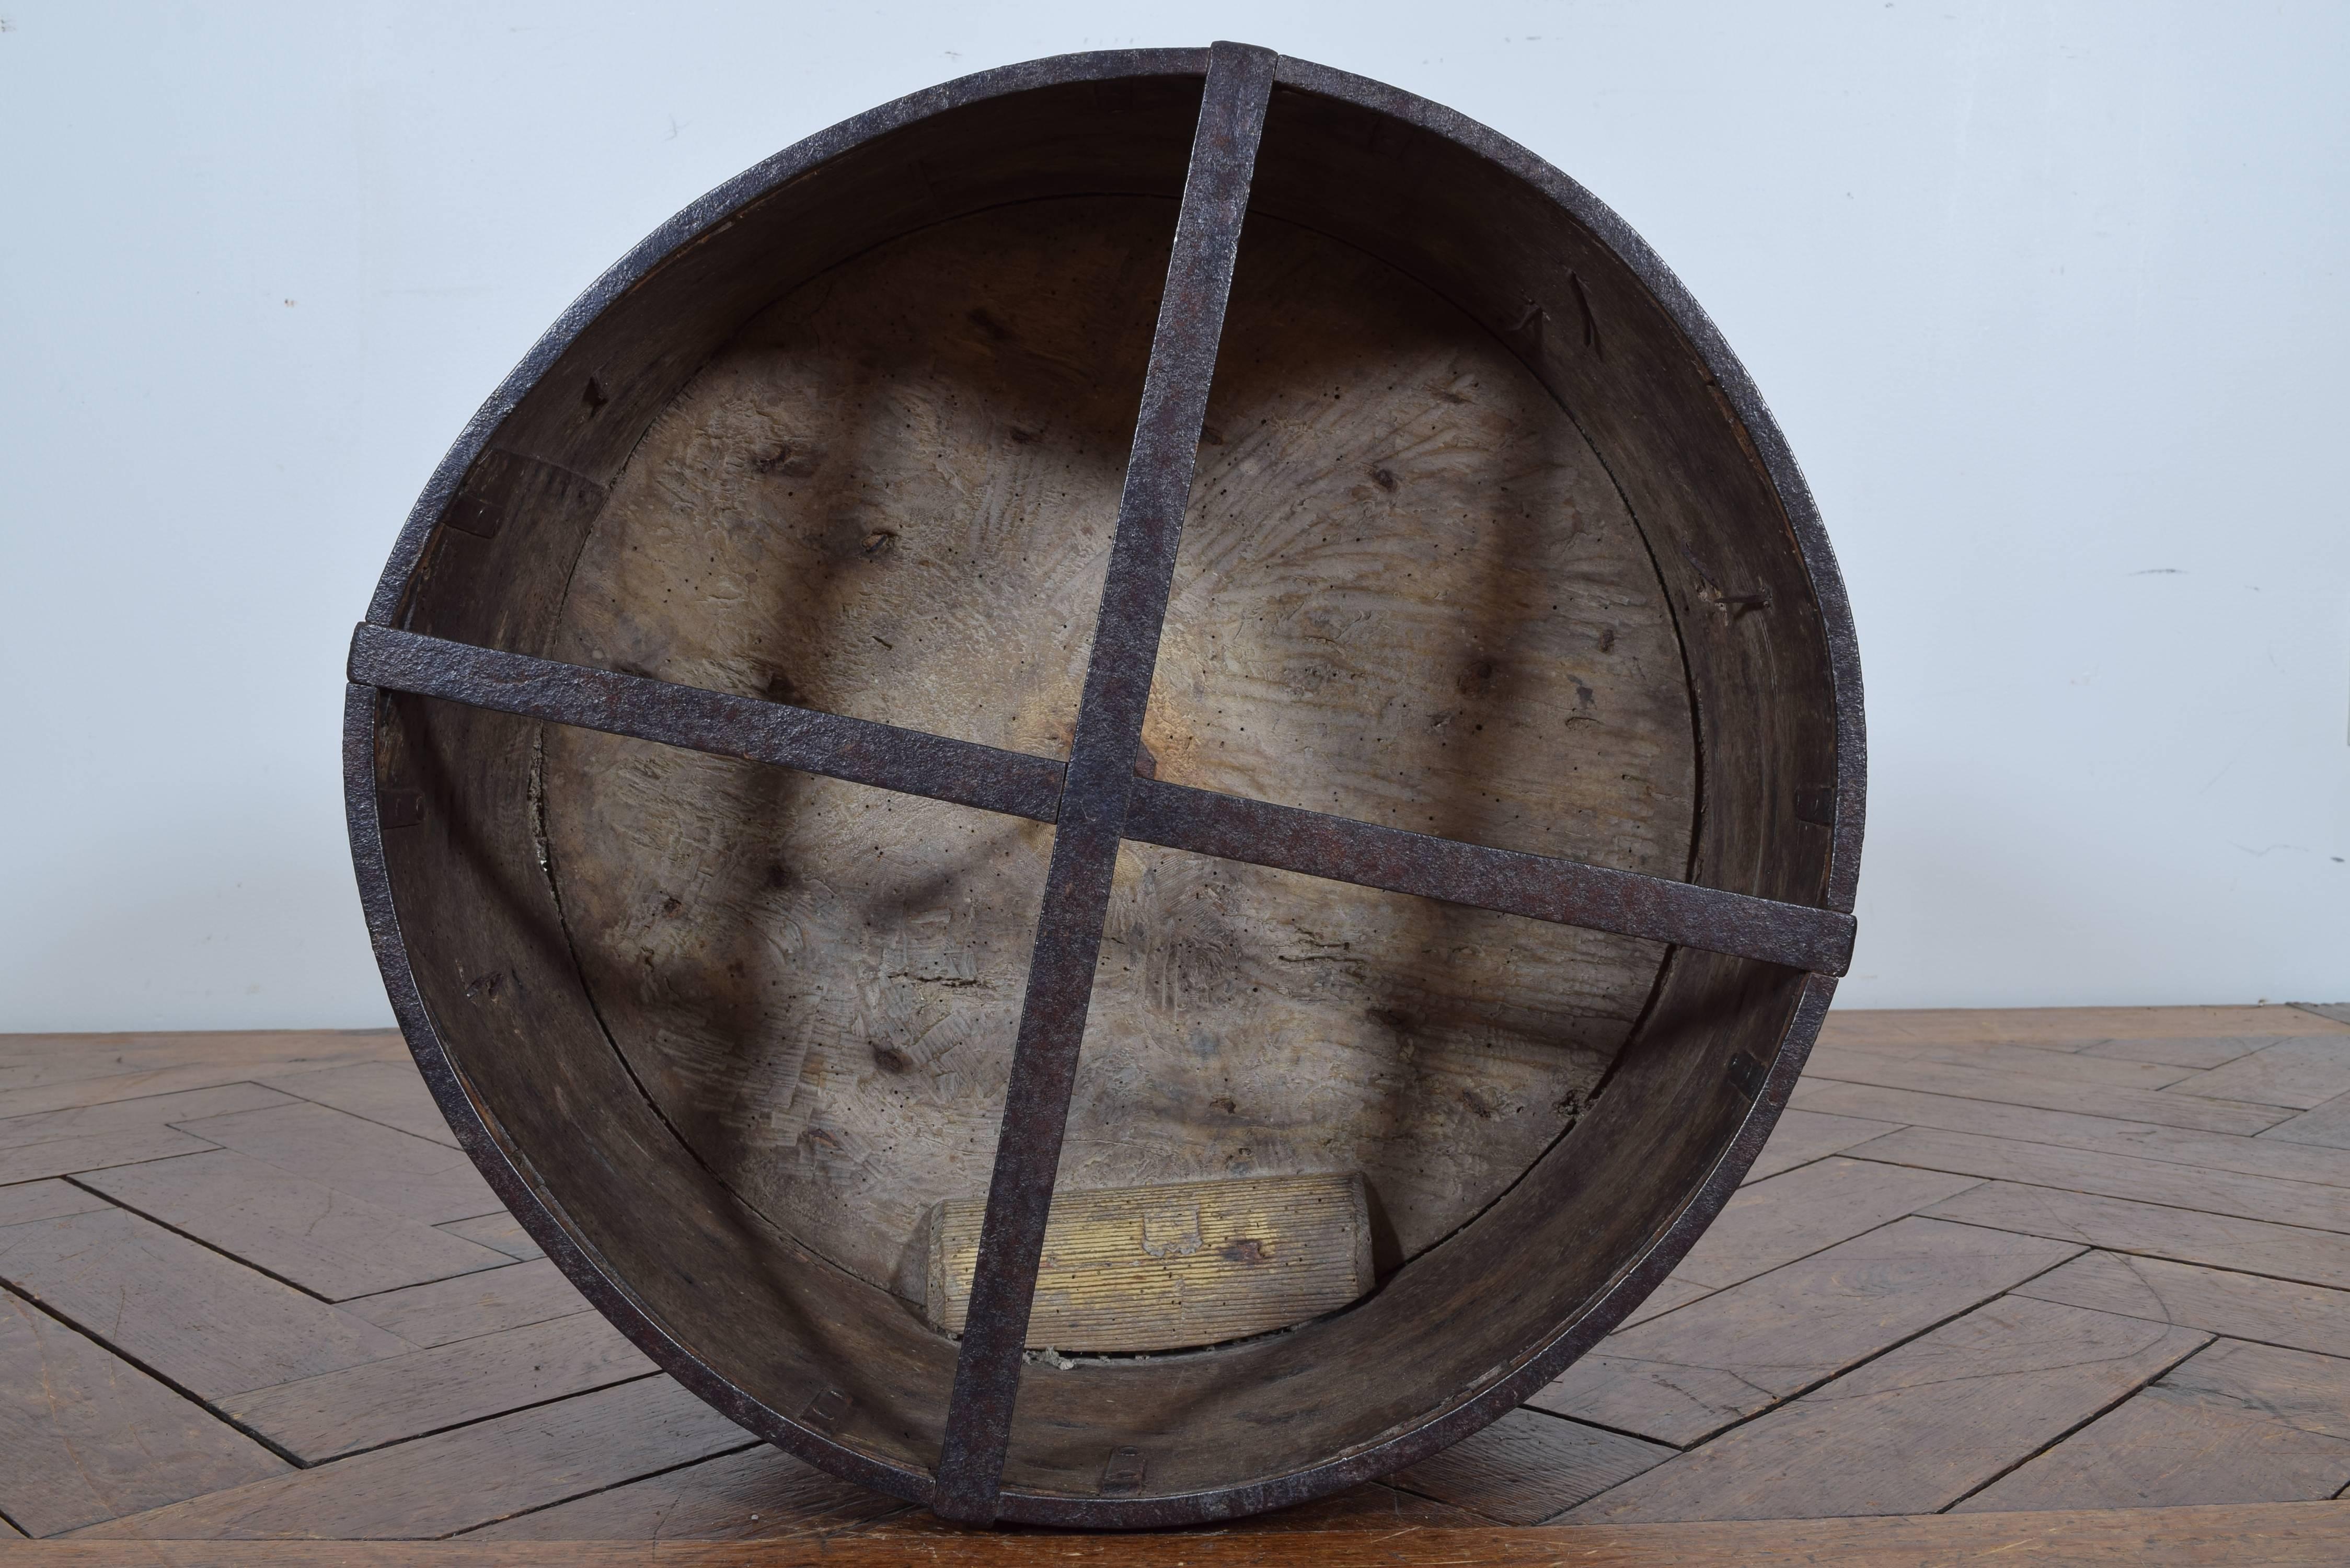 Of cylindrical form and constructed of two pieces of wood it is reinforced with iron bracing and decorated overall with iron scrolls and trefoils as well as bound by iron straps, the function was to provide an official measure of grain, the small